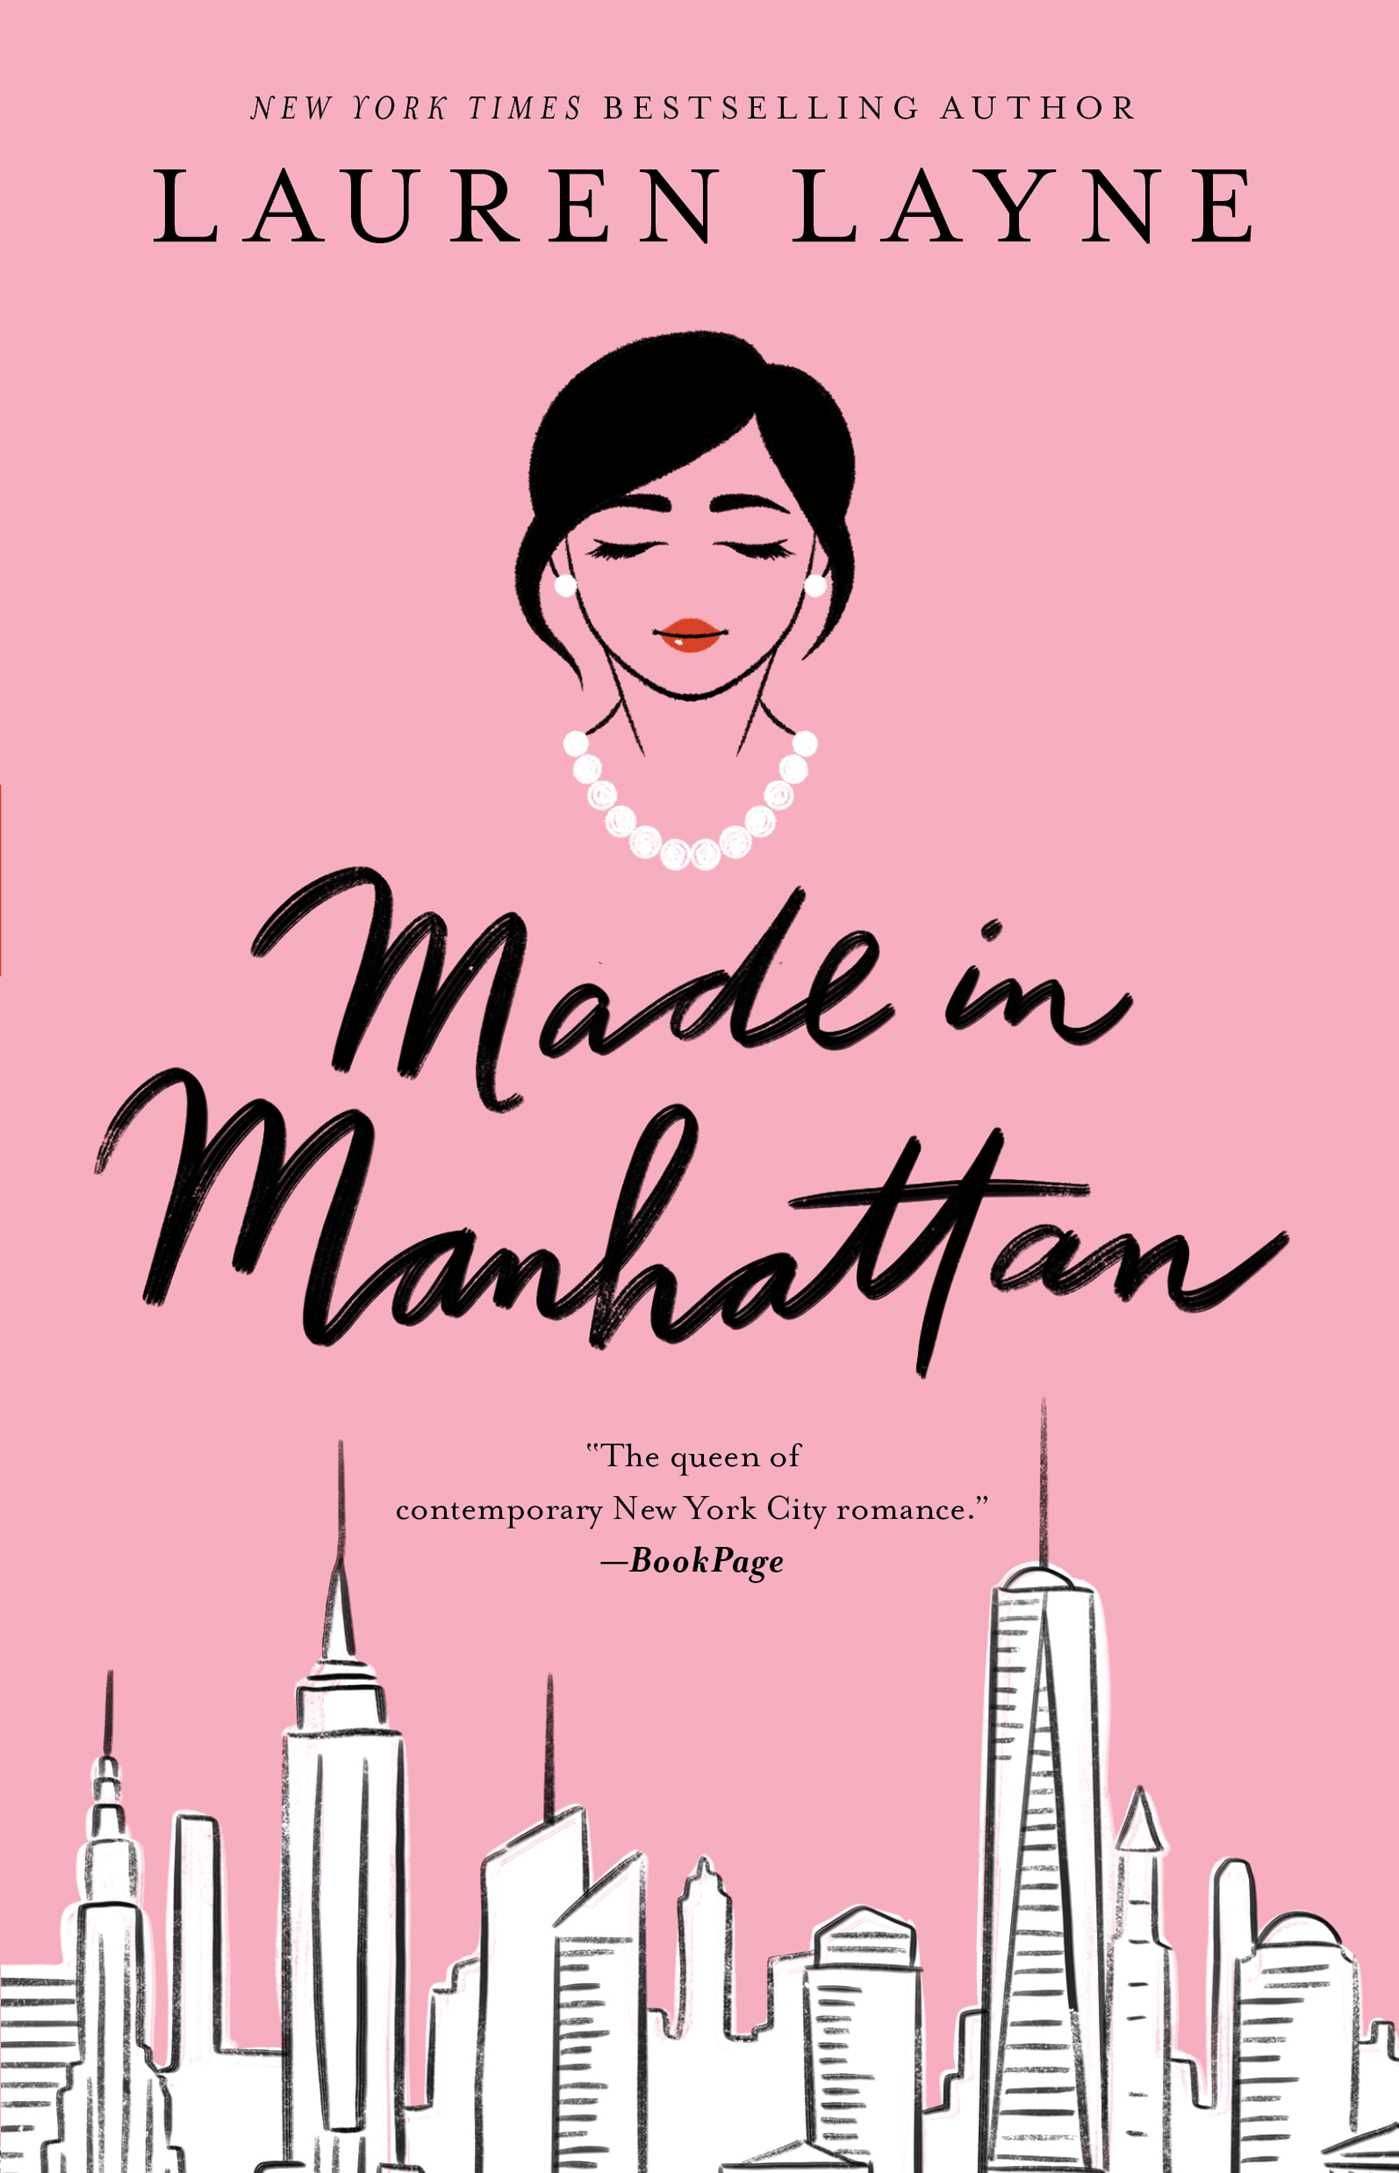 Cover image of "Made in Manhattan" by Lauren Layne.